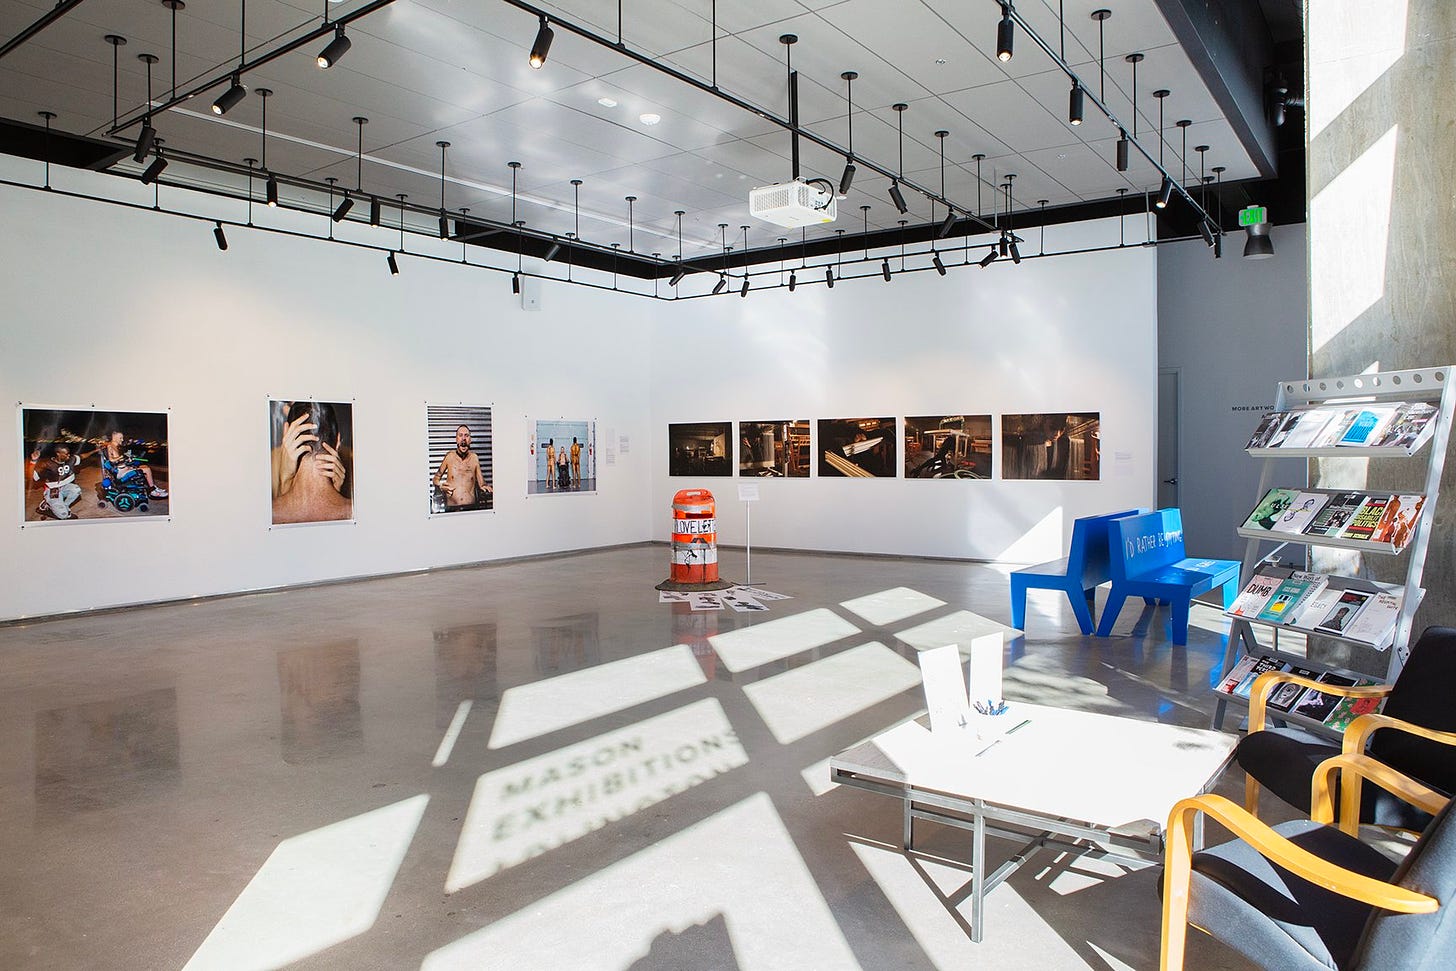 A gallery with photo works on a white wall, blue benches, and bright sunlight casting onto a cement floor.